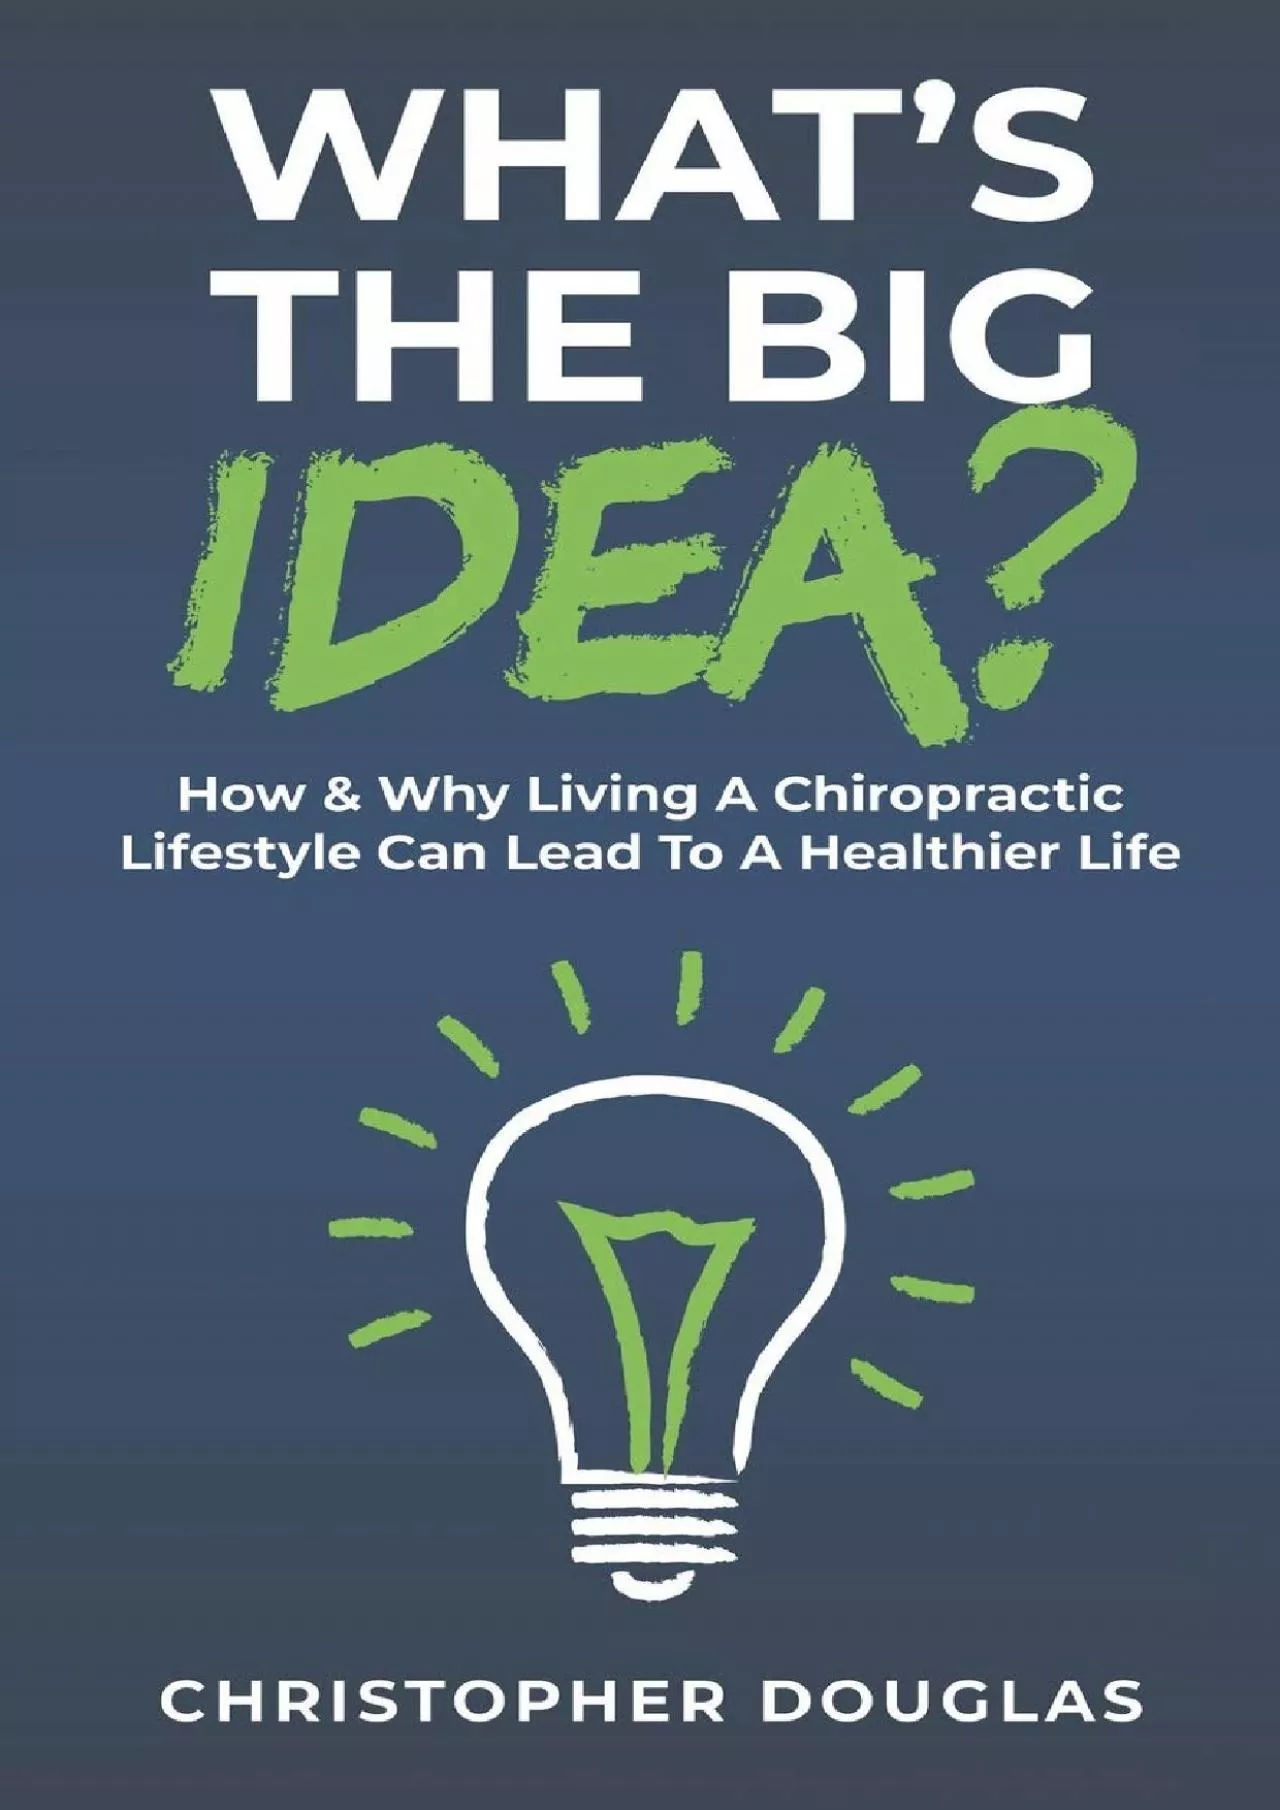 (DOWNLOAD)-What’s The Big Idea?: How & Why Living A Chiropractic Lifestyle Can Lead